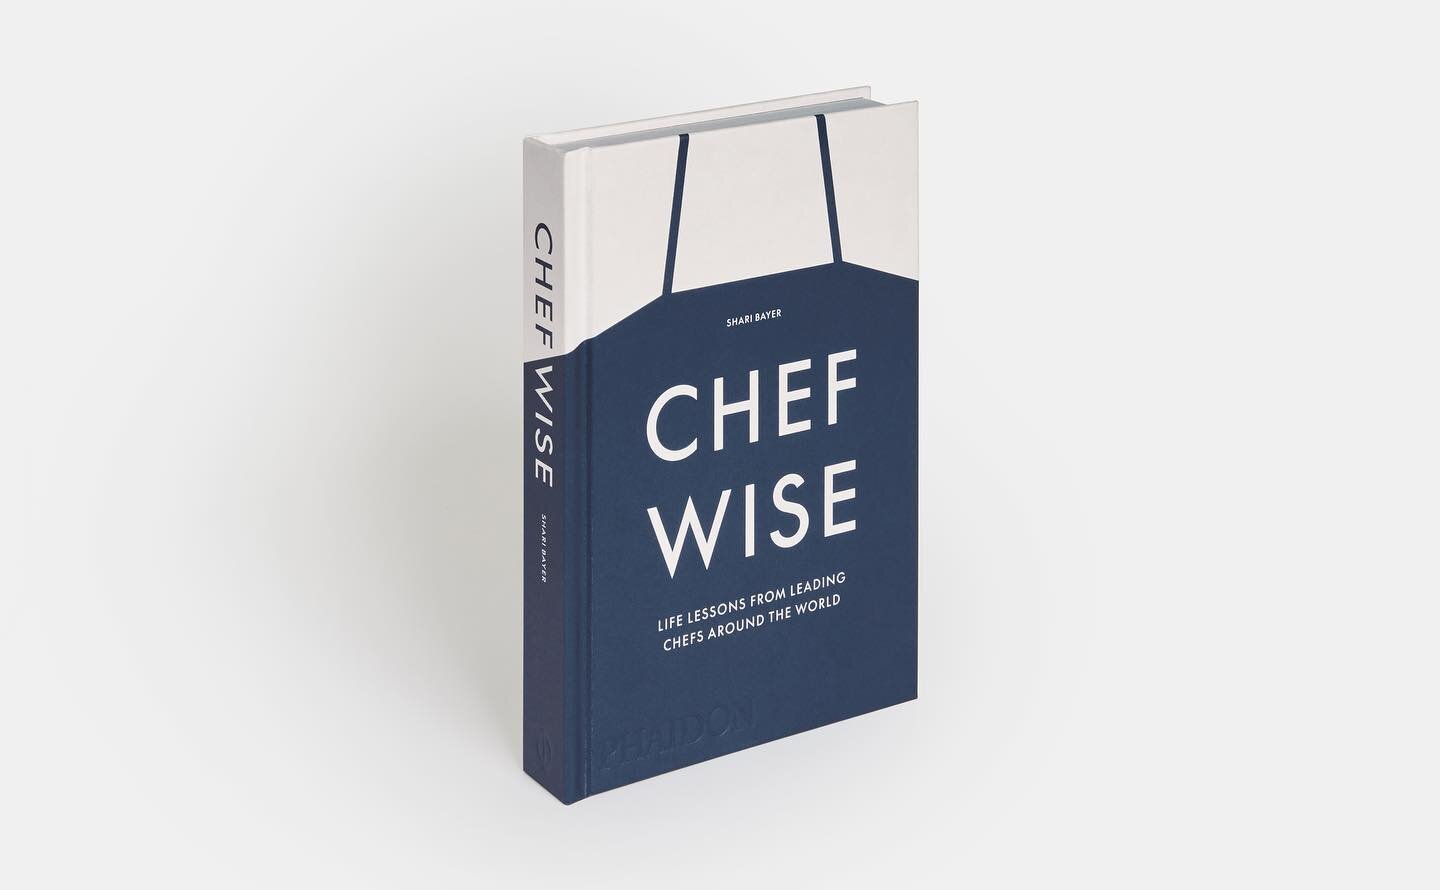 I&rsquo;m thrilled to have had the opportunity to contribute my own life lessons to Chefwise, a unique and inspiring book featuring wisdom from some of the world's leading chefs.

Whether you're an aspiring chef, taking you&rsquo;re first steps in th